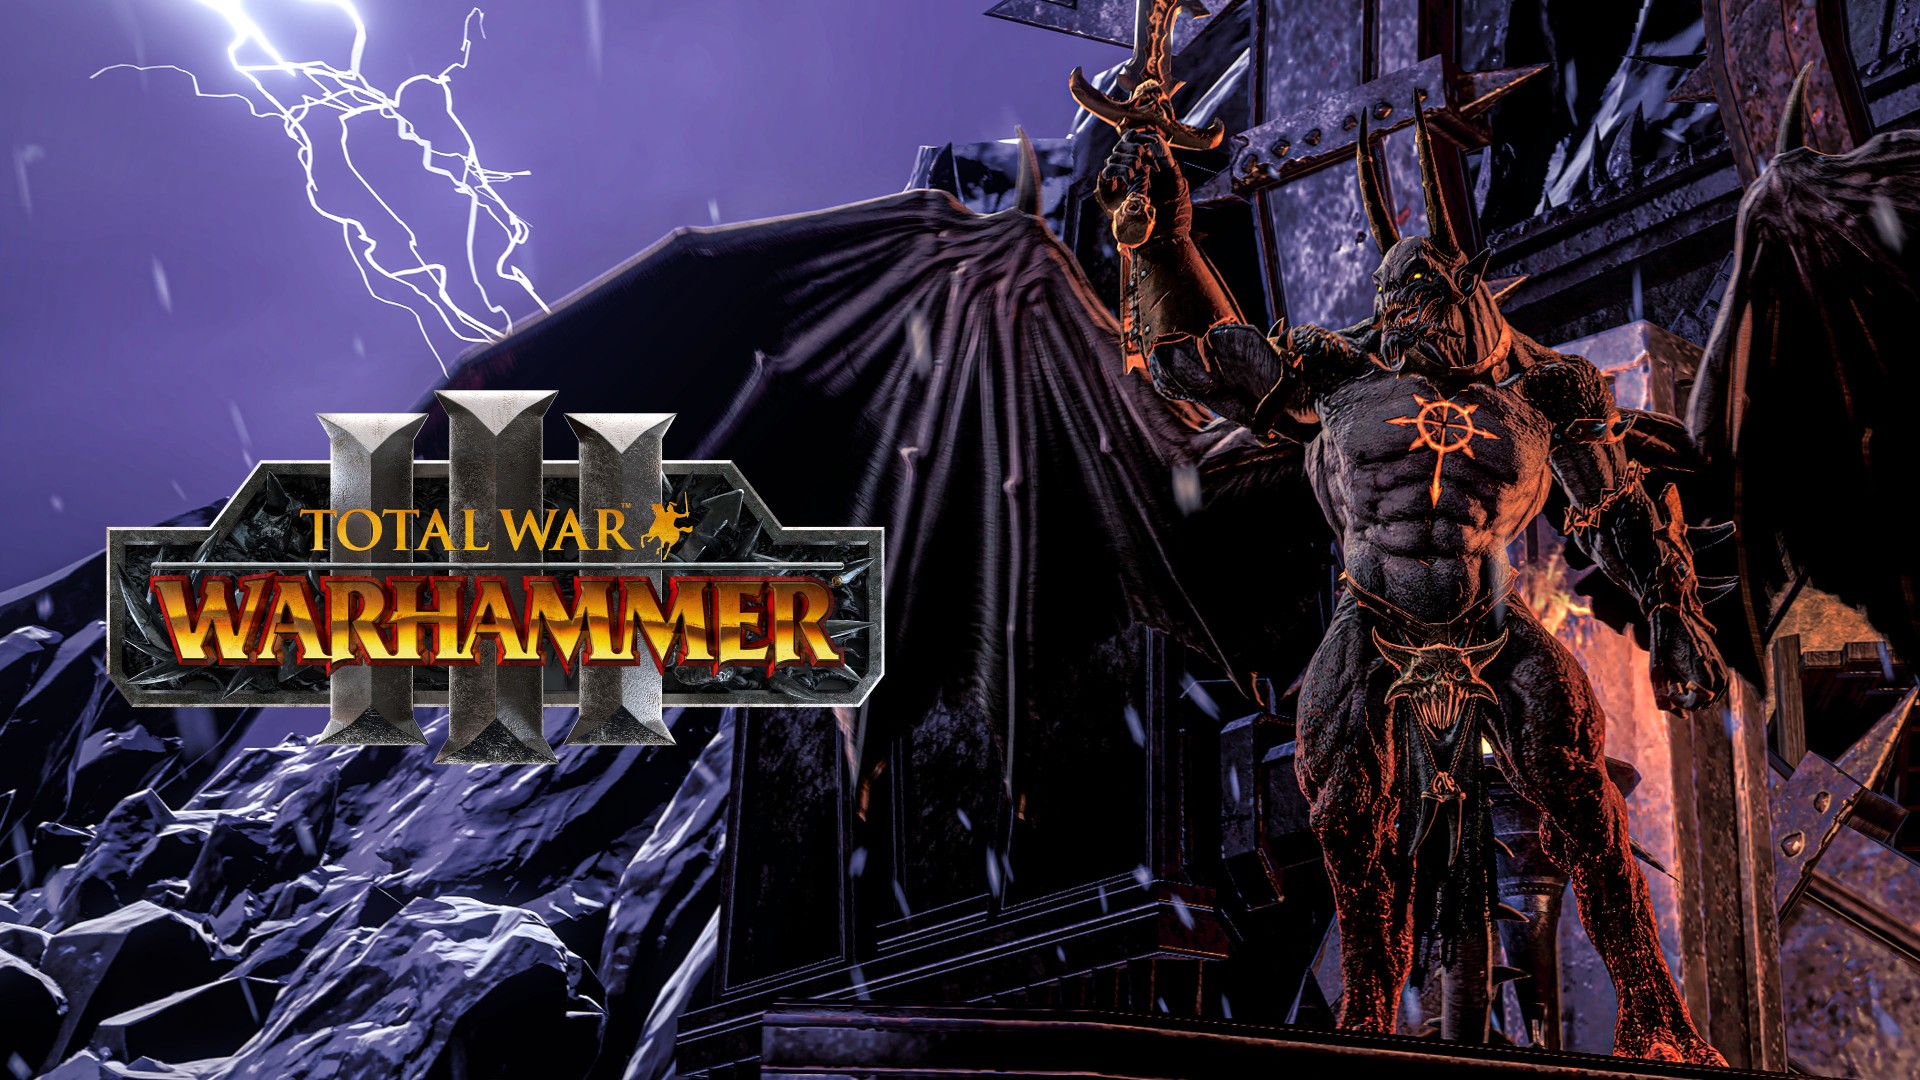 Video For Total War: Warhammer III Reveals New Legendary Lord, the Monstrous Daemon Prince